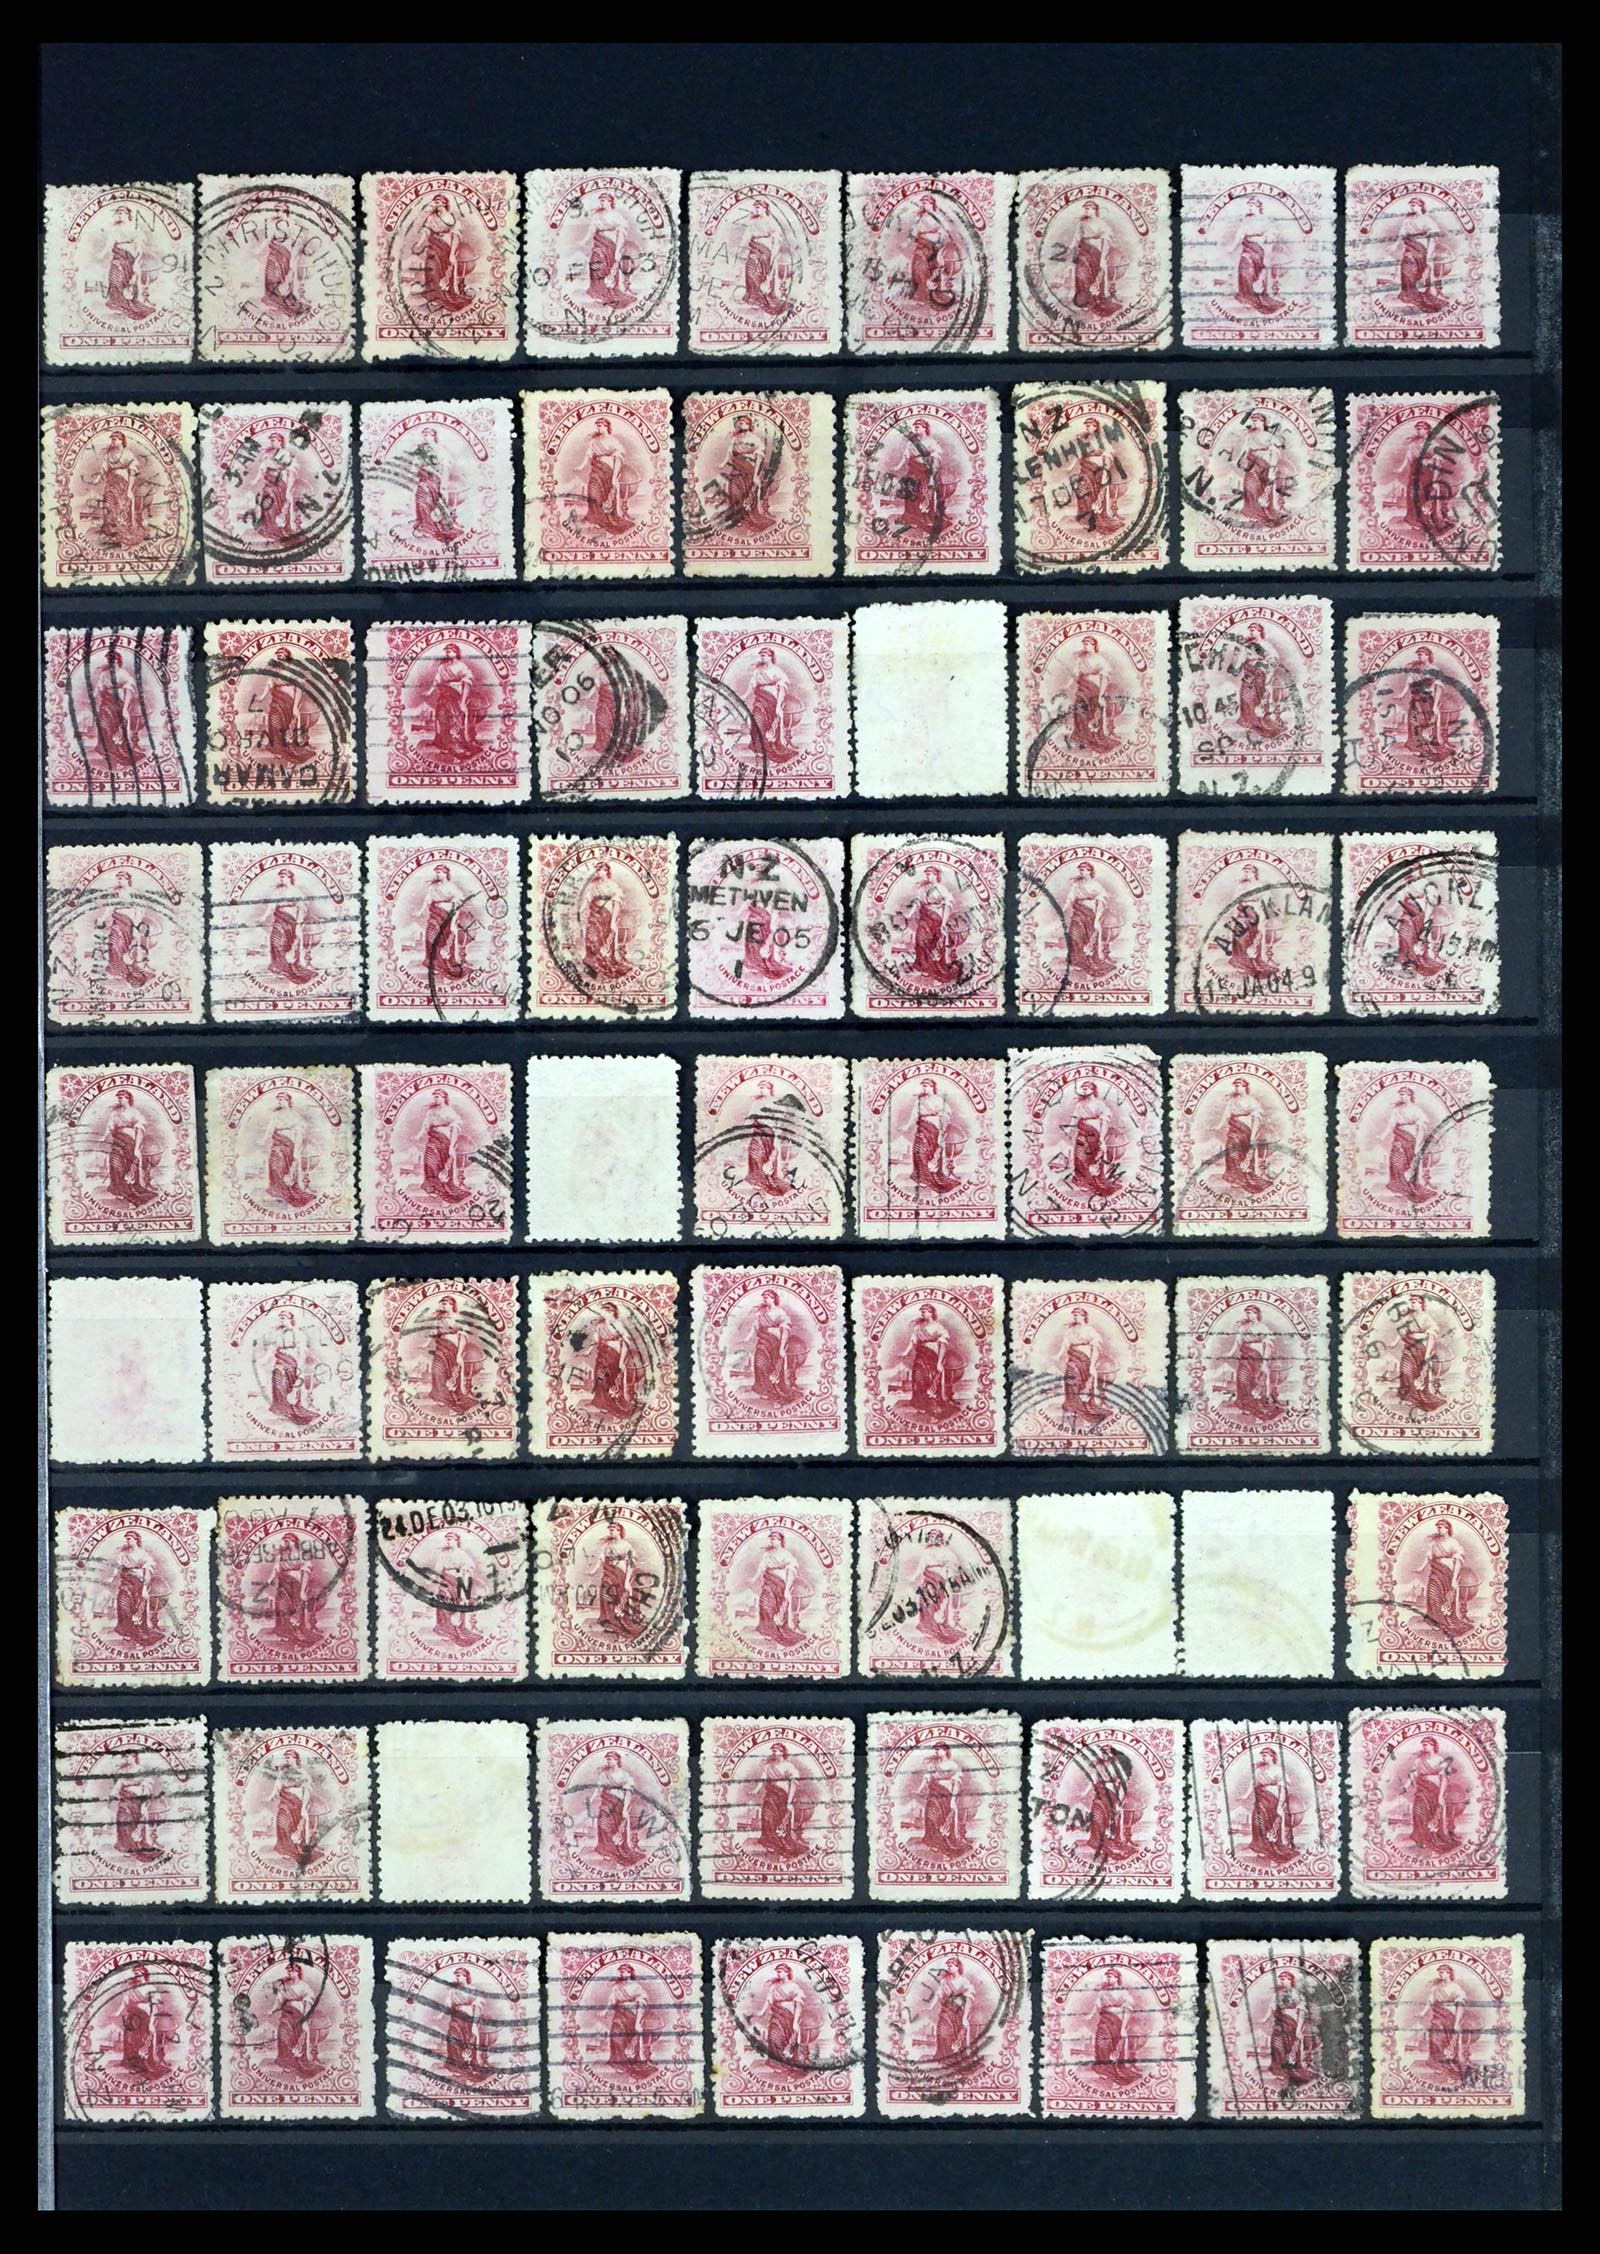 37434 029 - Stamp collection 37434 New Zealand 1901-1908.